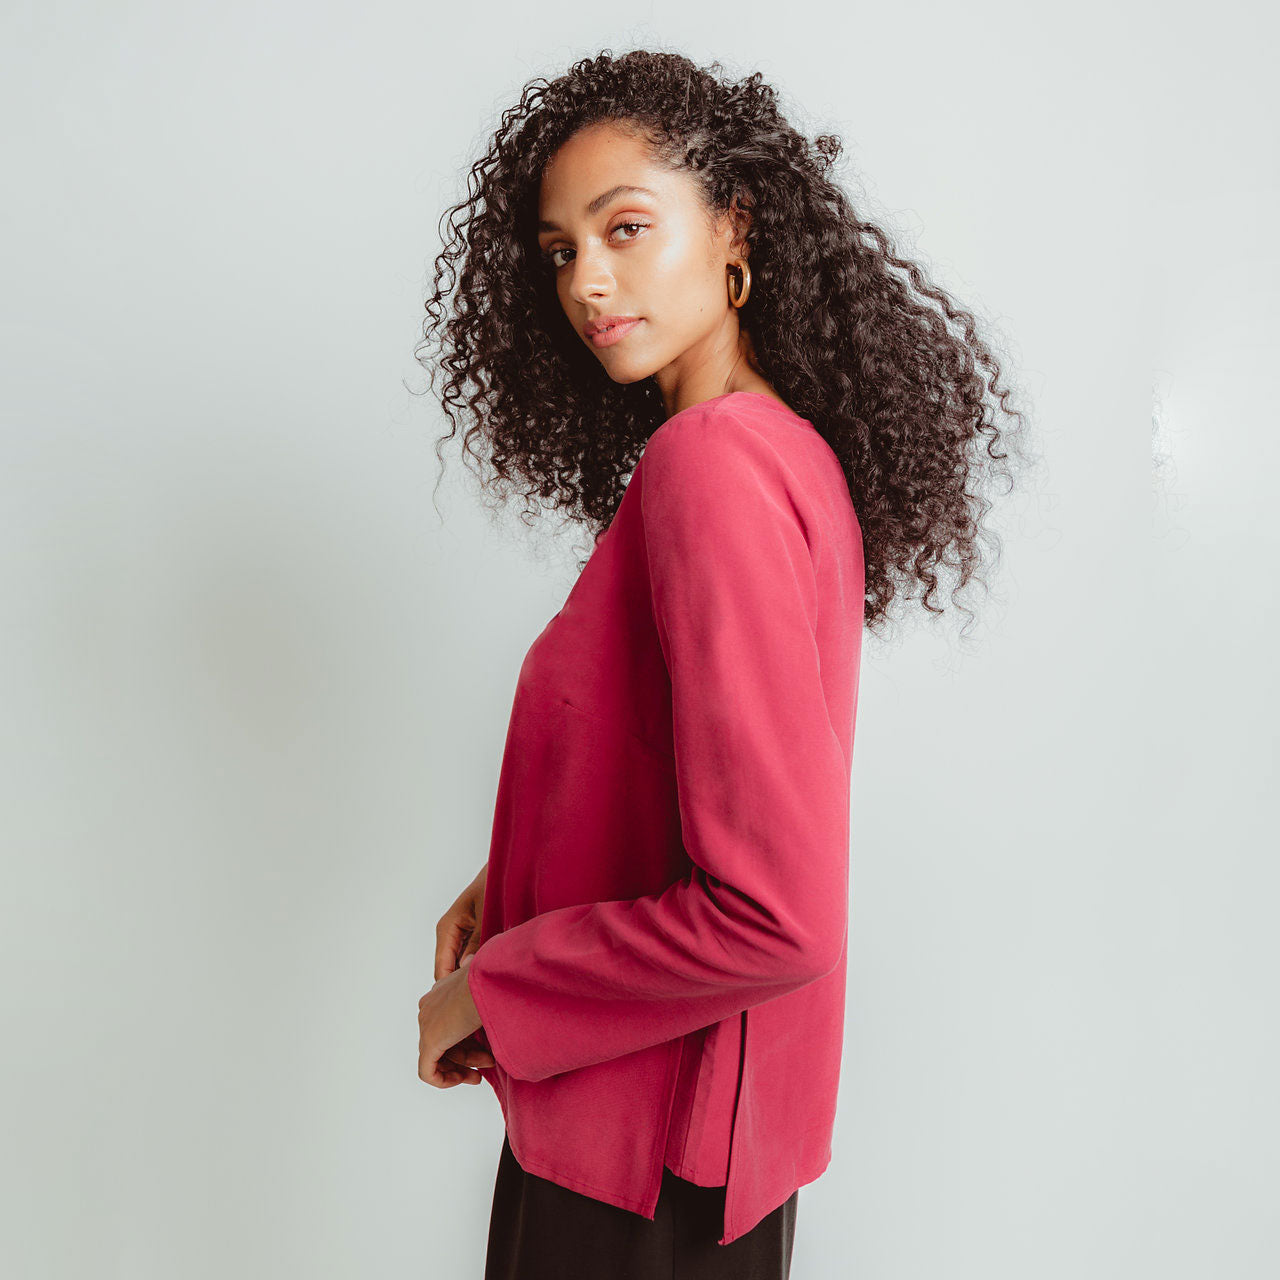 Panel Top in Rose - 50% Off